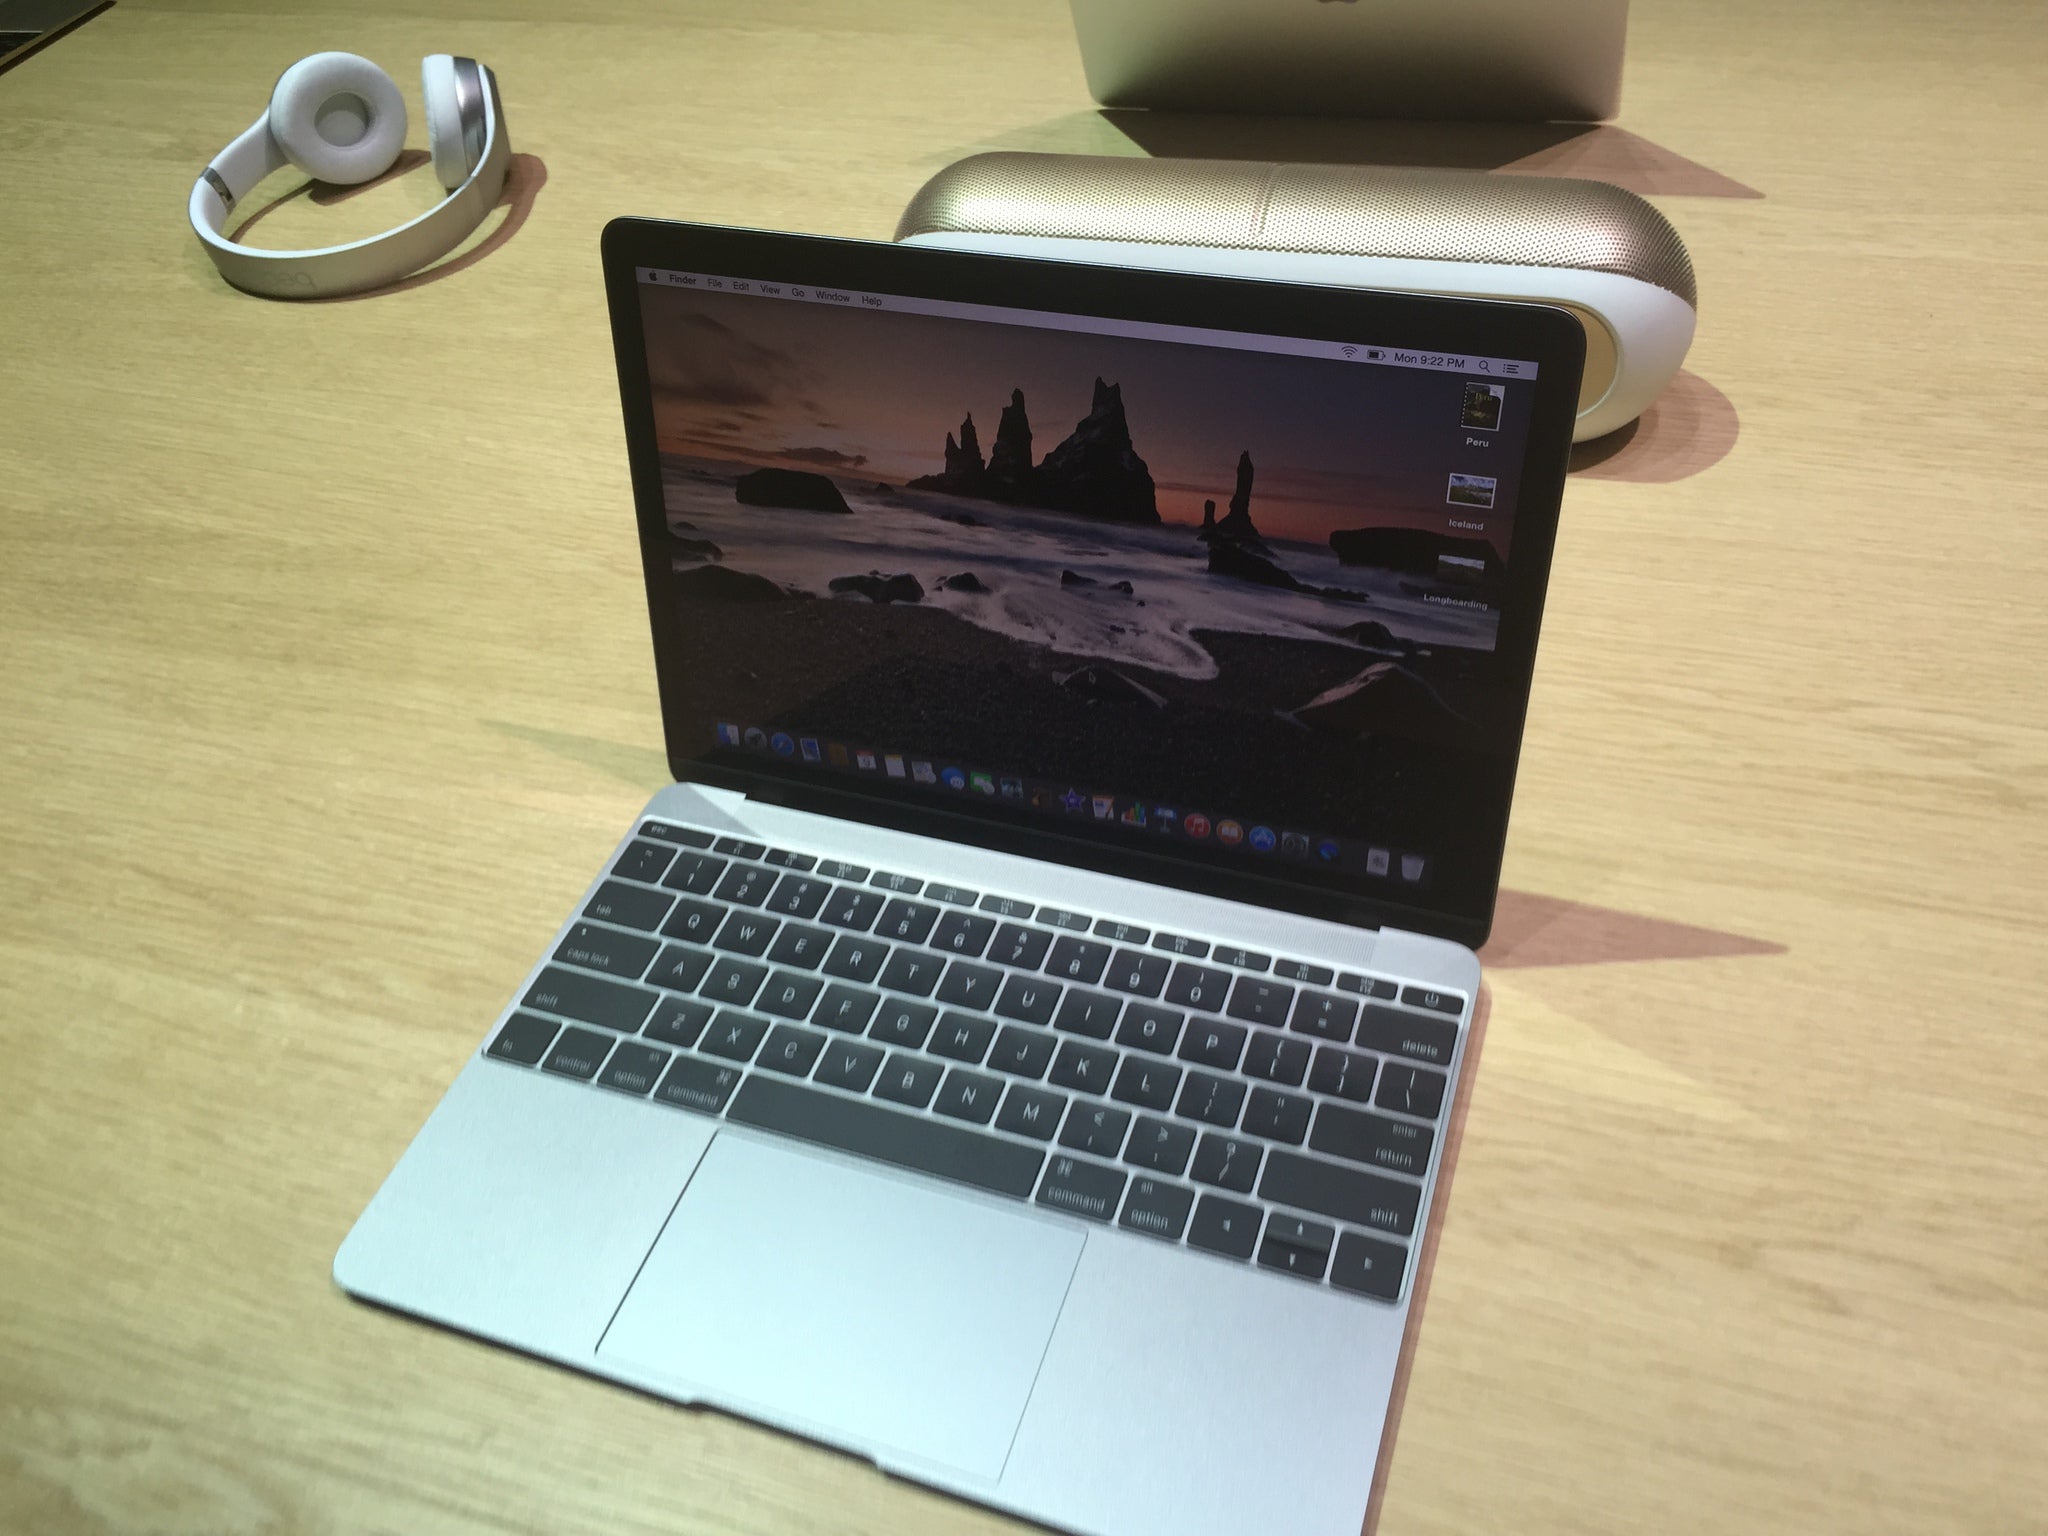 The new MacBook, which features San Francisco on its keyboard